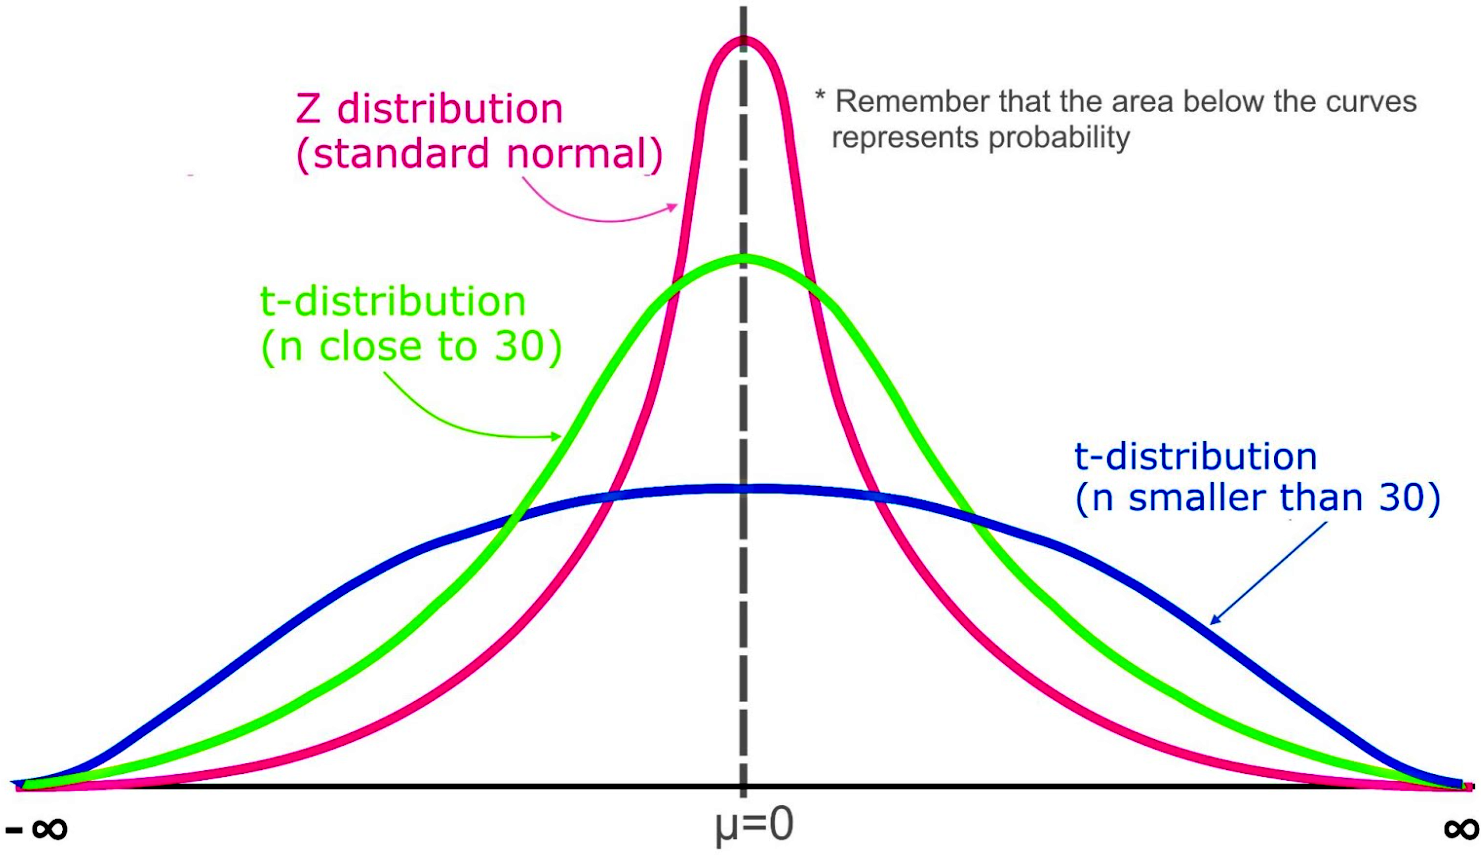 Students t-distribution